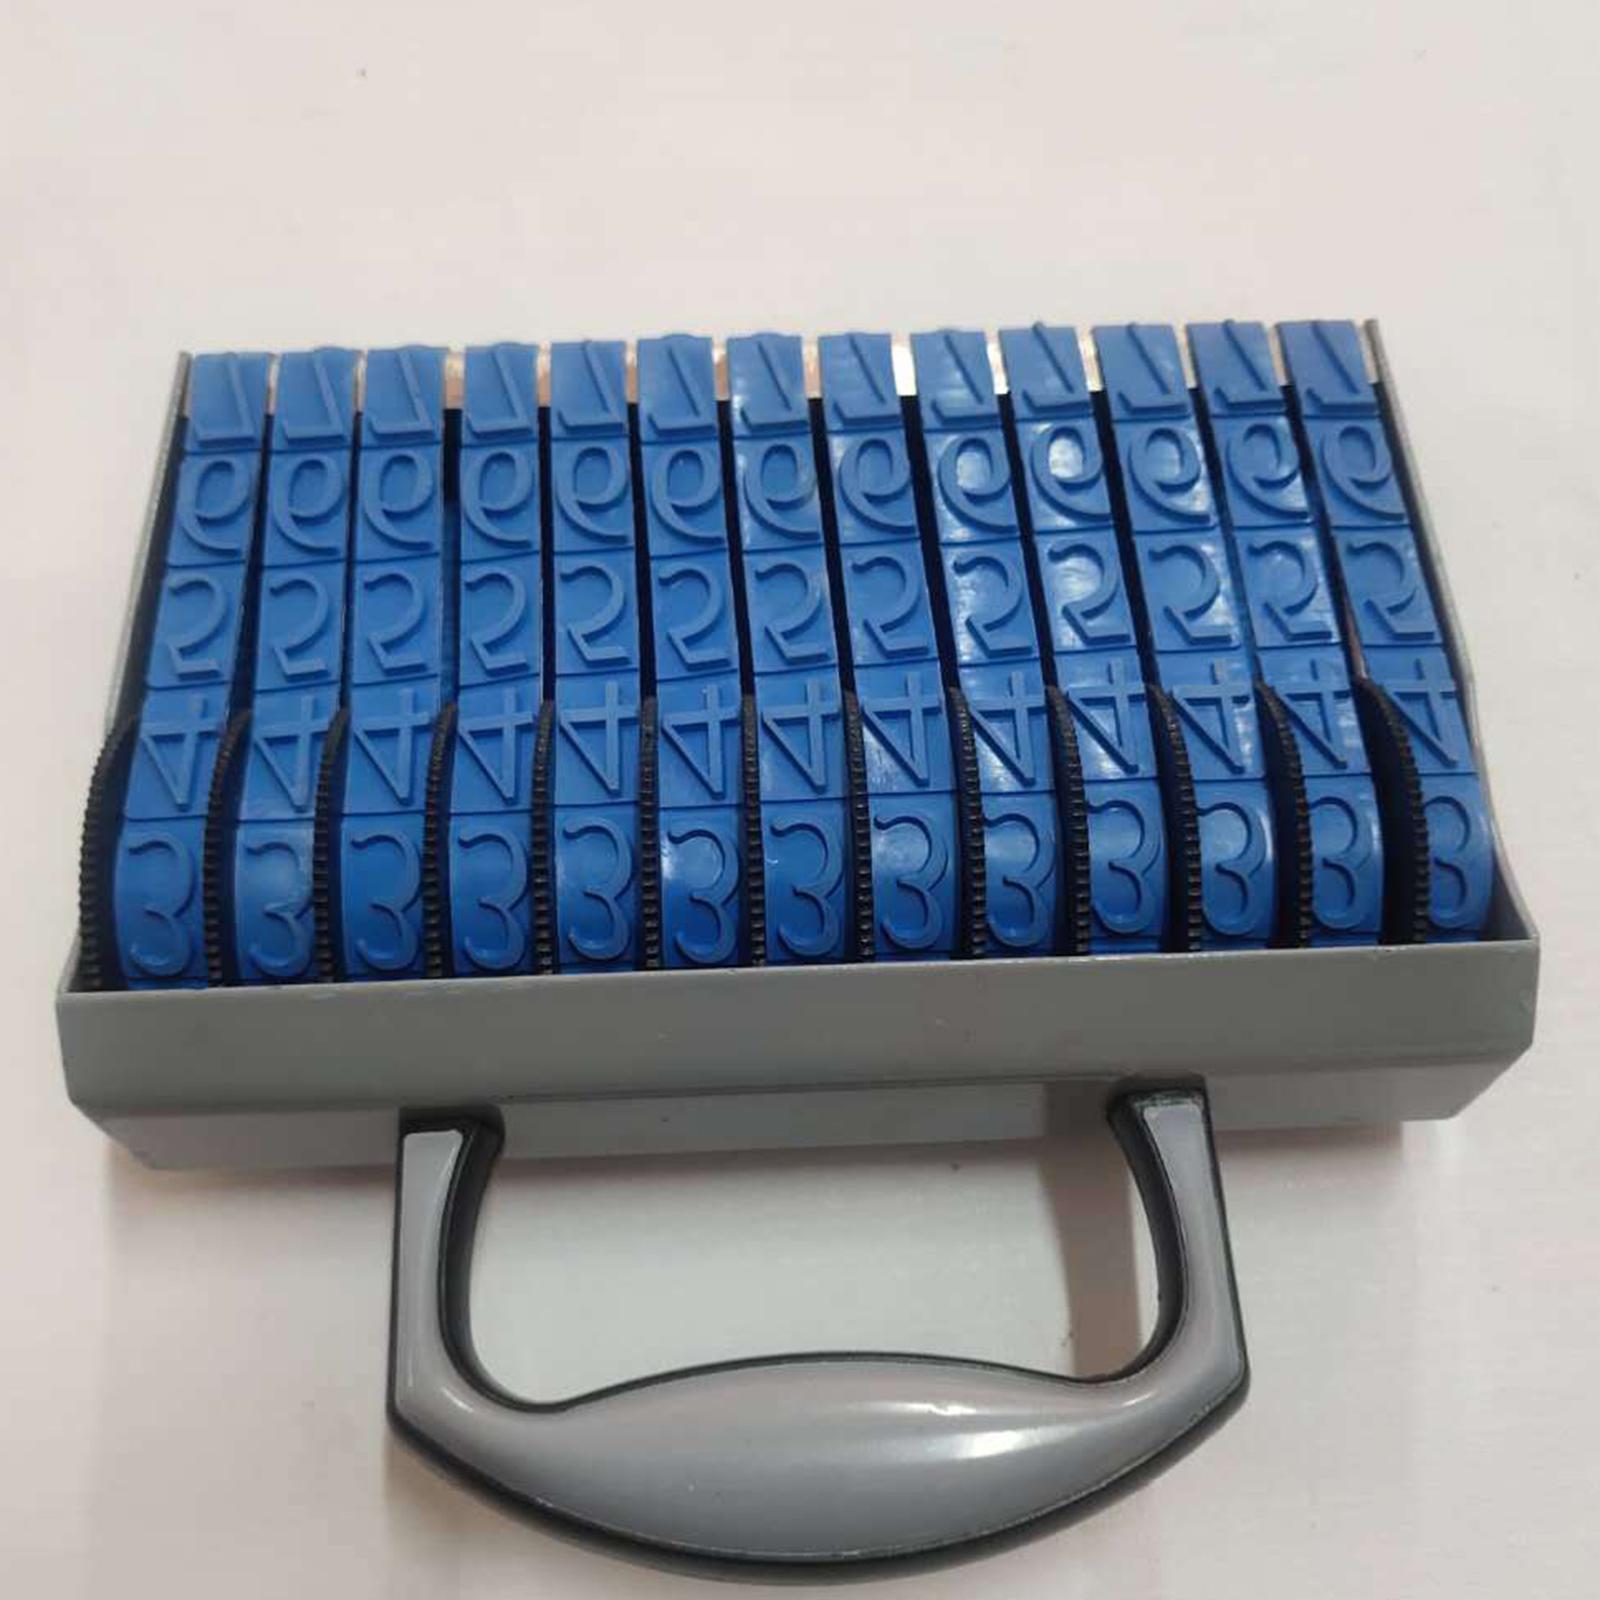 13 digits Rubber Number Stamp Accs Personalized Number Seal Stamp for Office